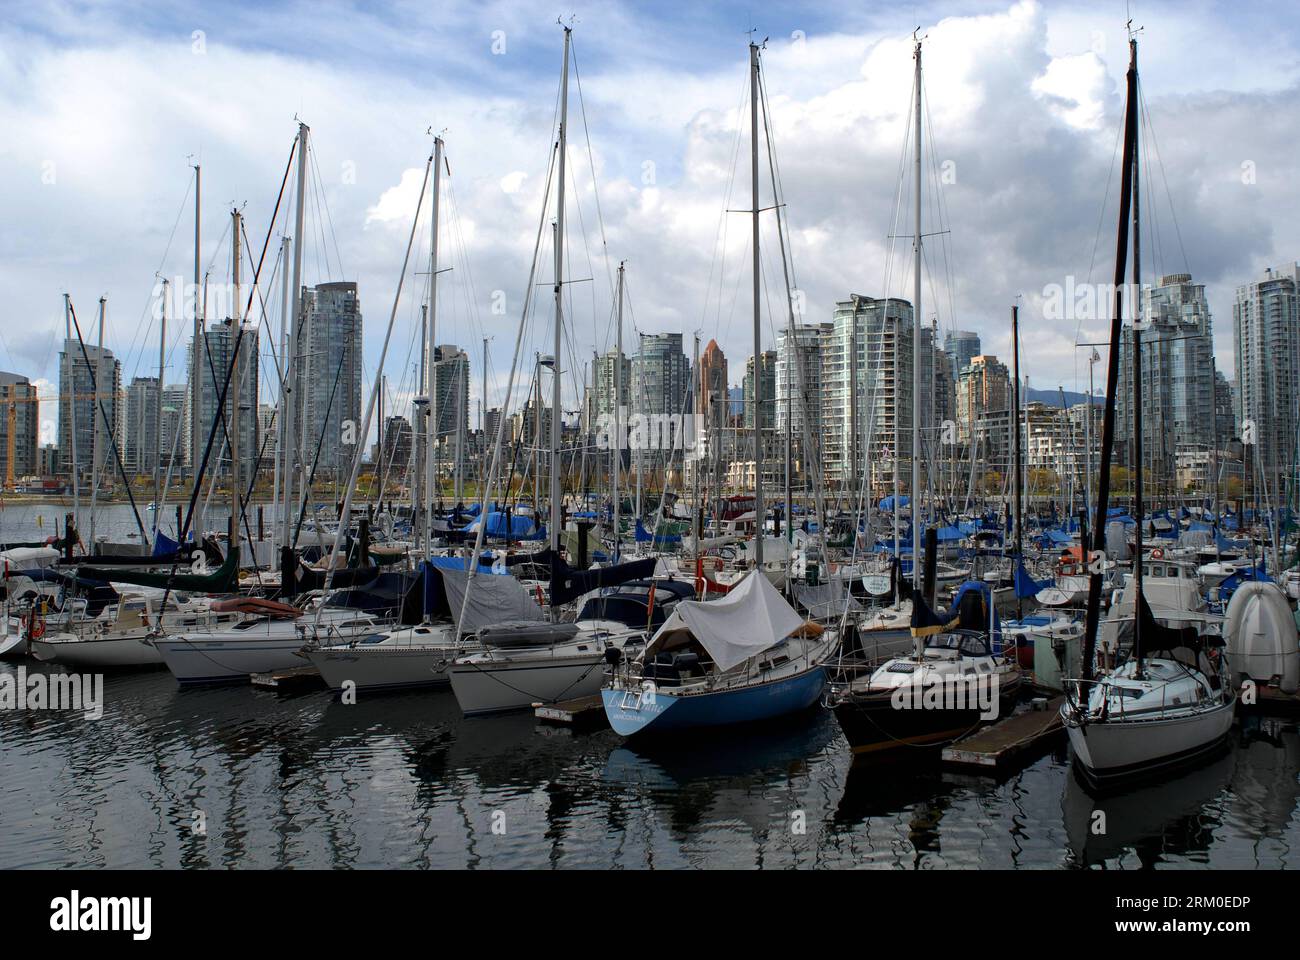 Bildnummer: 59392540  Datum: 20.03.2013  Copyright: imago/Xinhua (130320) -- VANCOUVER, March 20, 2013 (Xinhua) -- Photo taken on March 20, 2013 shows the view of Vancouver s Yaletown in Canada. The City of Vancouver stood out of 66 cities and was awarded  GlobalEarthHour Capital 2013 by the WorldWildlifeFund (WWF) on Tuesday for its efforts to address climate change. (Xinhua/Sergei Bachlakov) CANADA-VANCOUVER-WWF-ENVIRONMENT PUBLICATIONxNOTxINxCHN Gesellschaft Preis Ehrung Stadtehrung Architektur Stadtplanung Gebäude Totale Kanada x2x xdd premiumd 2013 quer o0 Hafen Boot Segelboot     5939254 Stock Photo